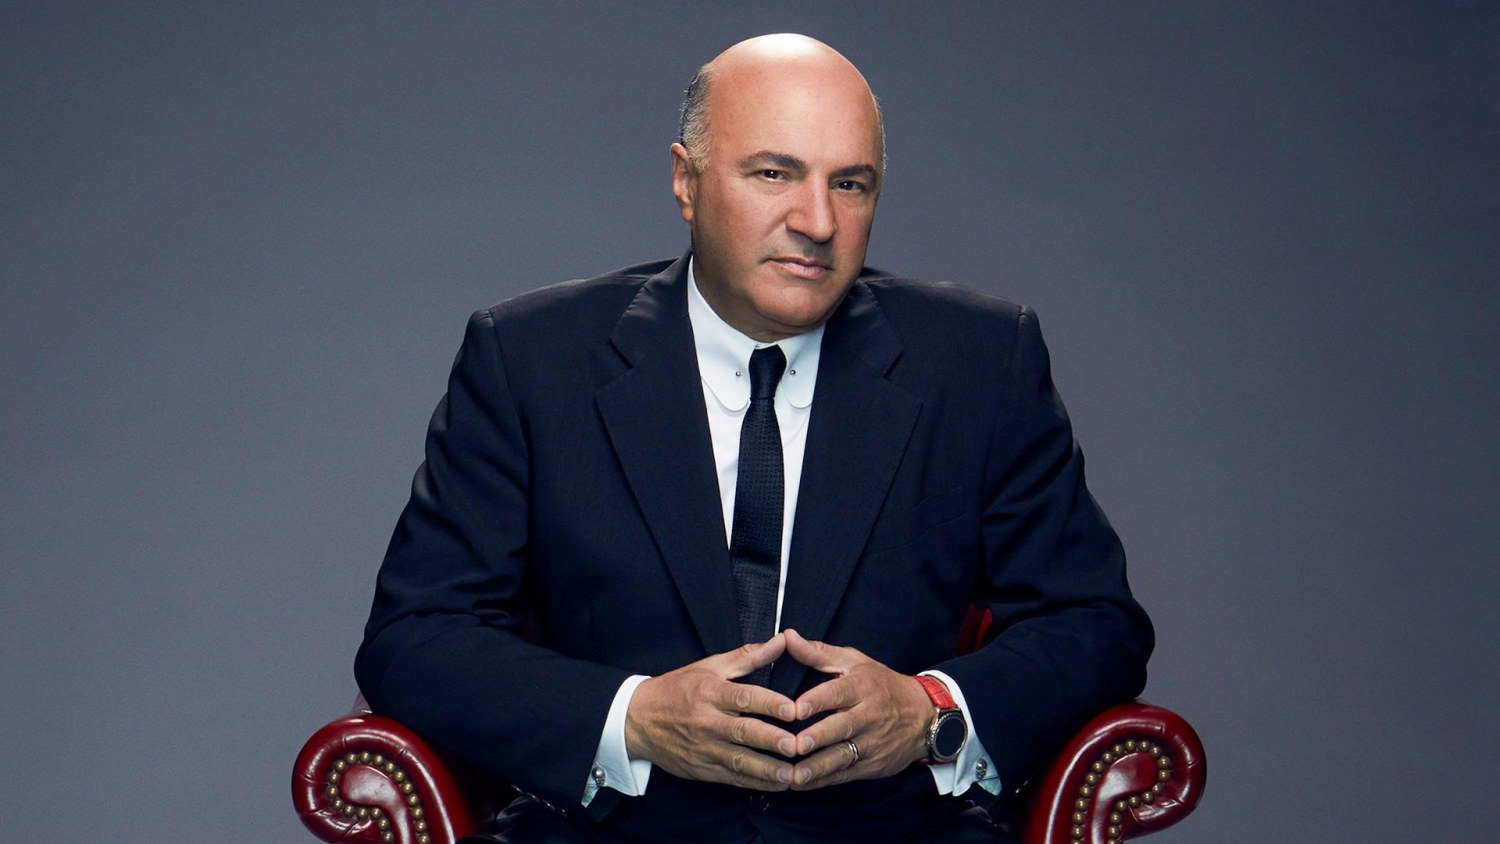 Becoming Mr. Wonderful  Kevin O'Leary Tells it All 